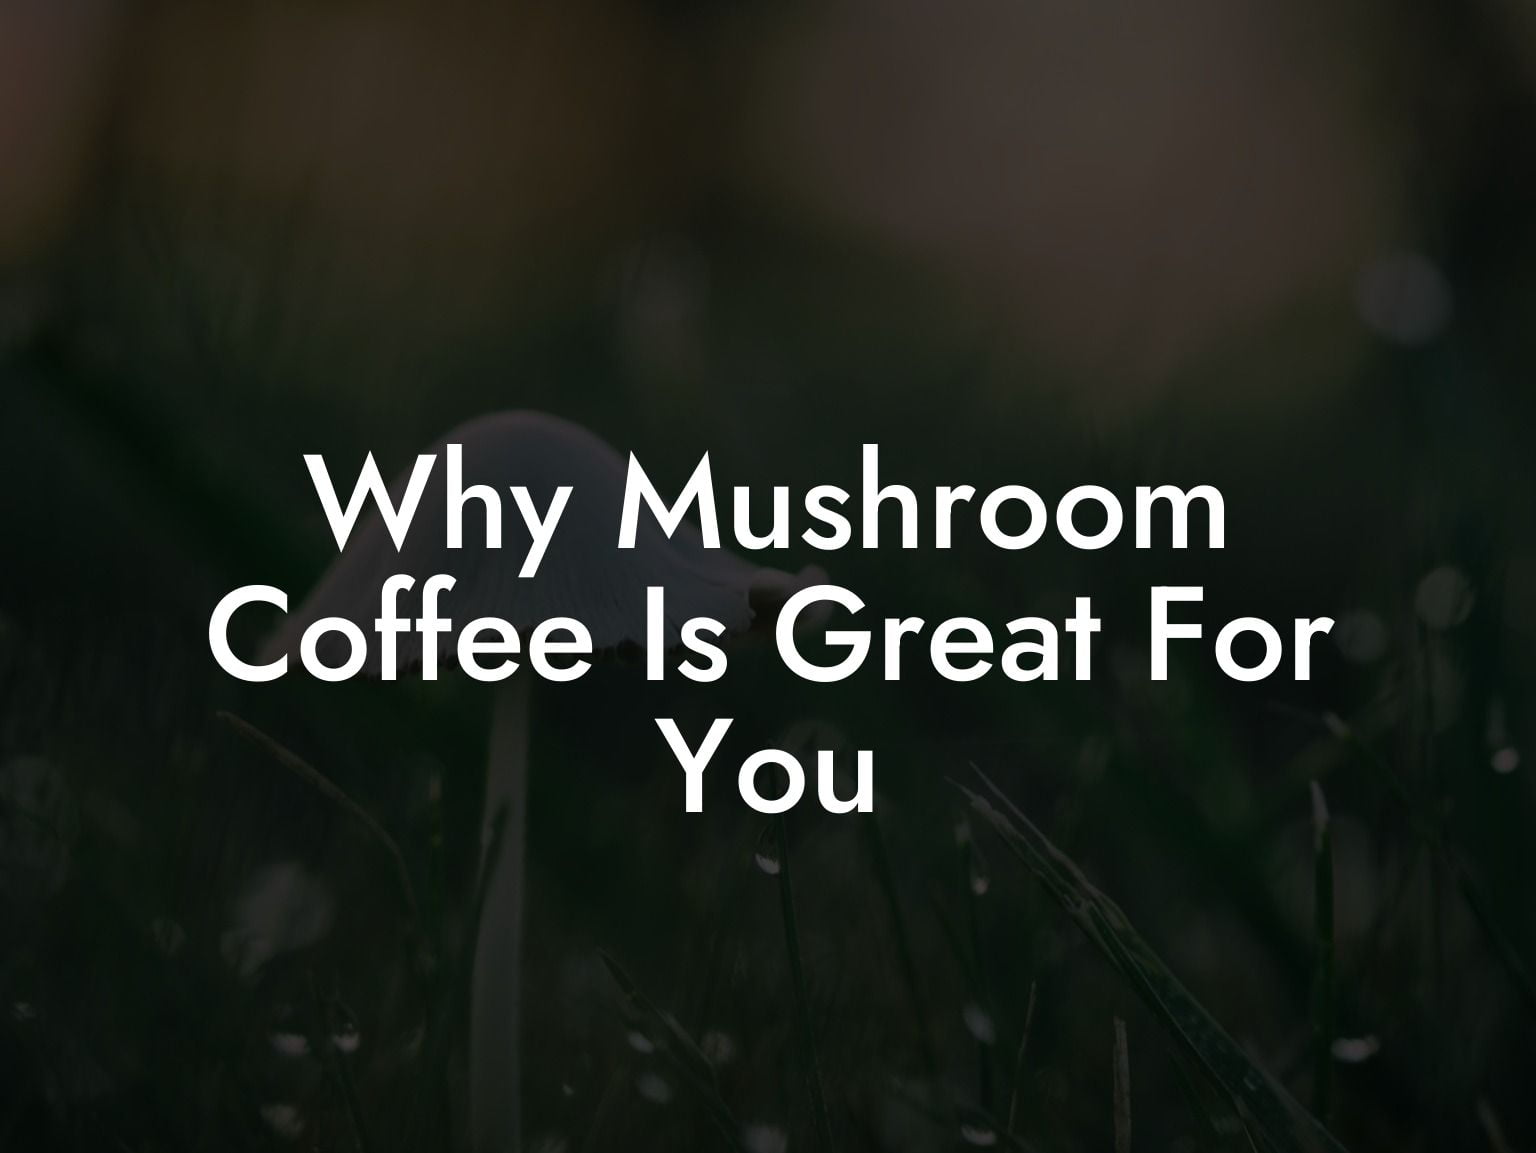 Why Mushroom Coffee Is Great For You